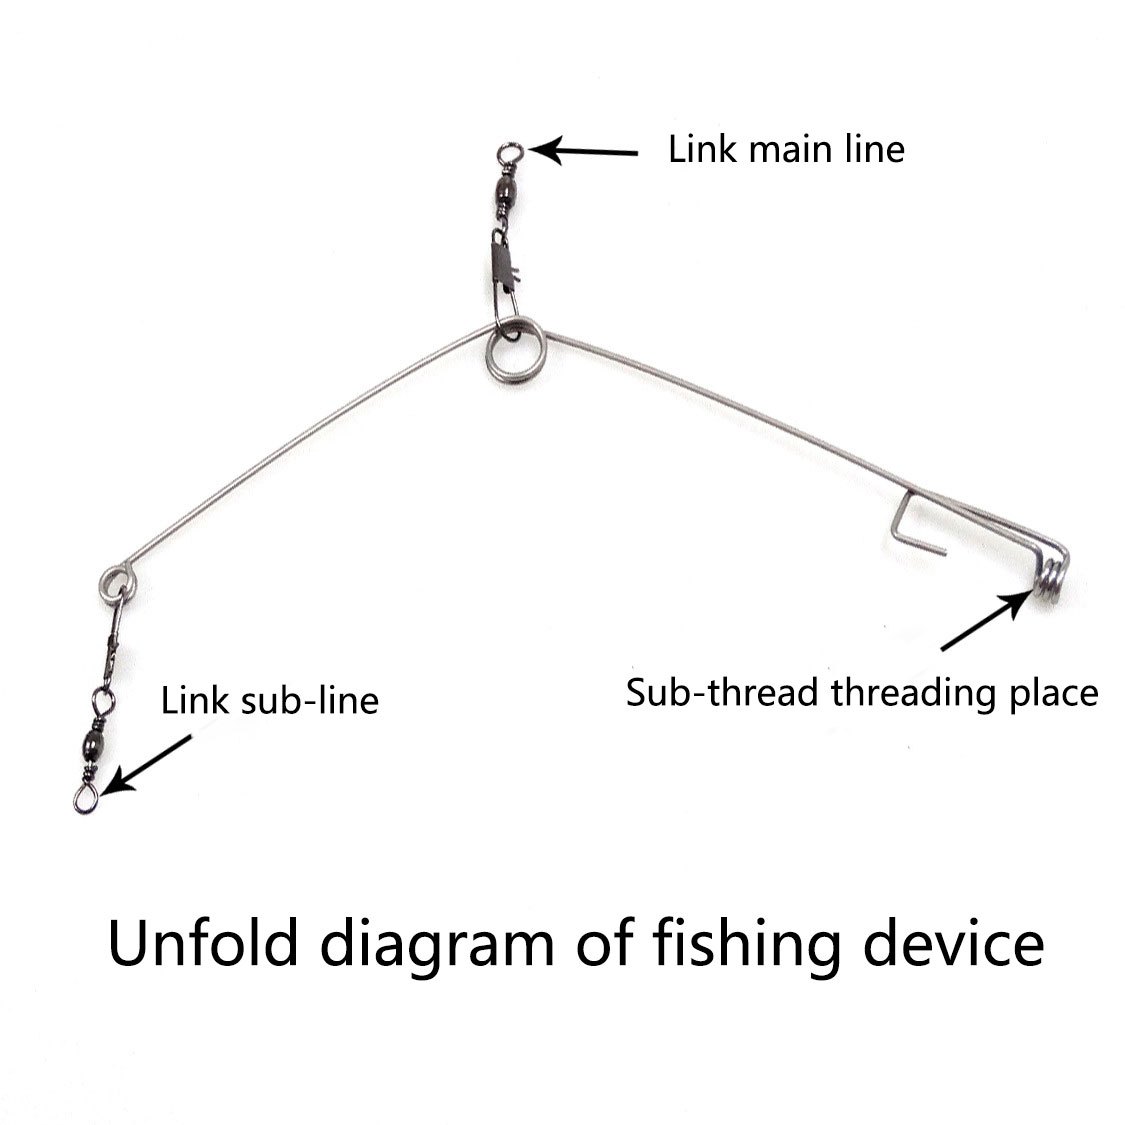 Automatic Fishing Device: Ultimate Trigger Spring Hook - Temu